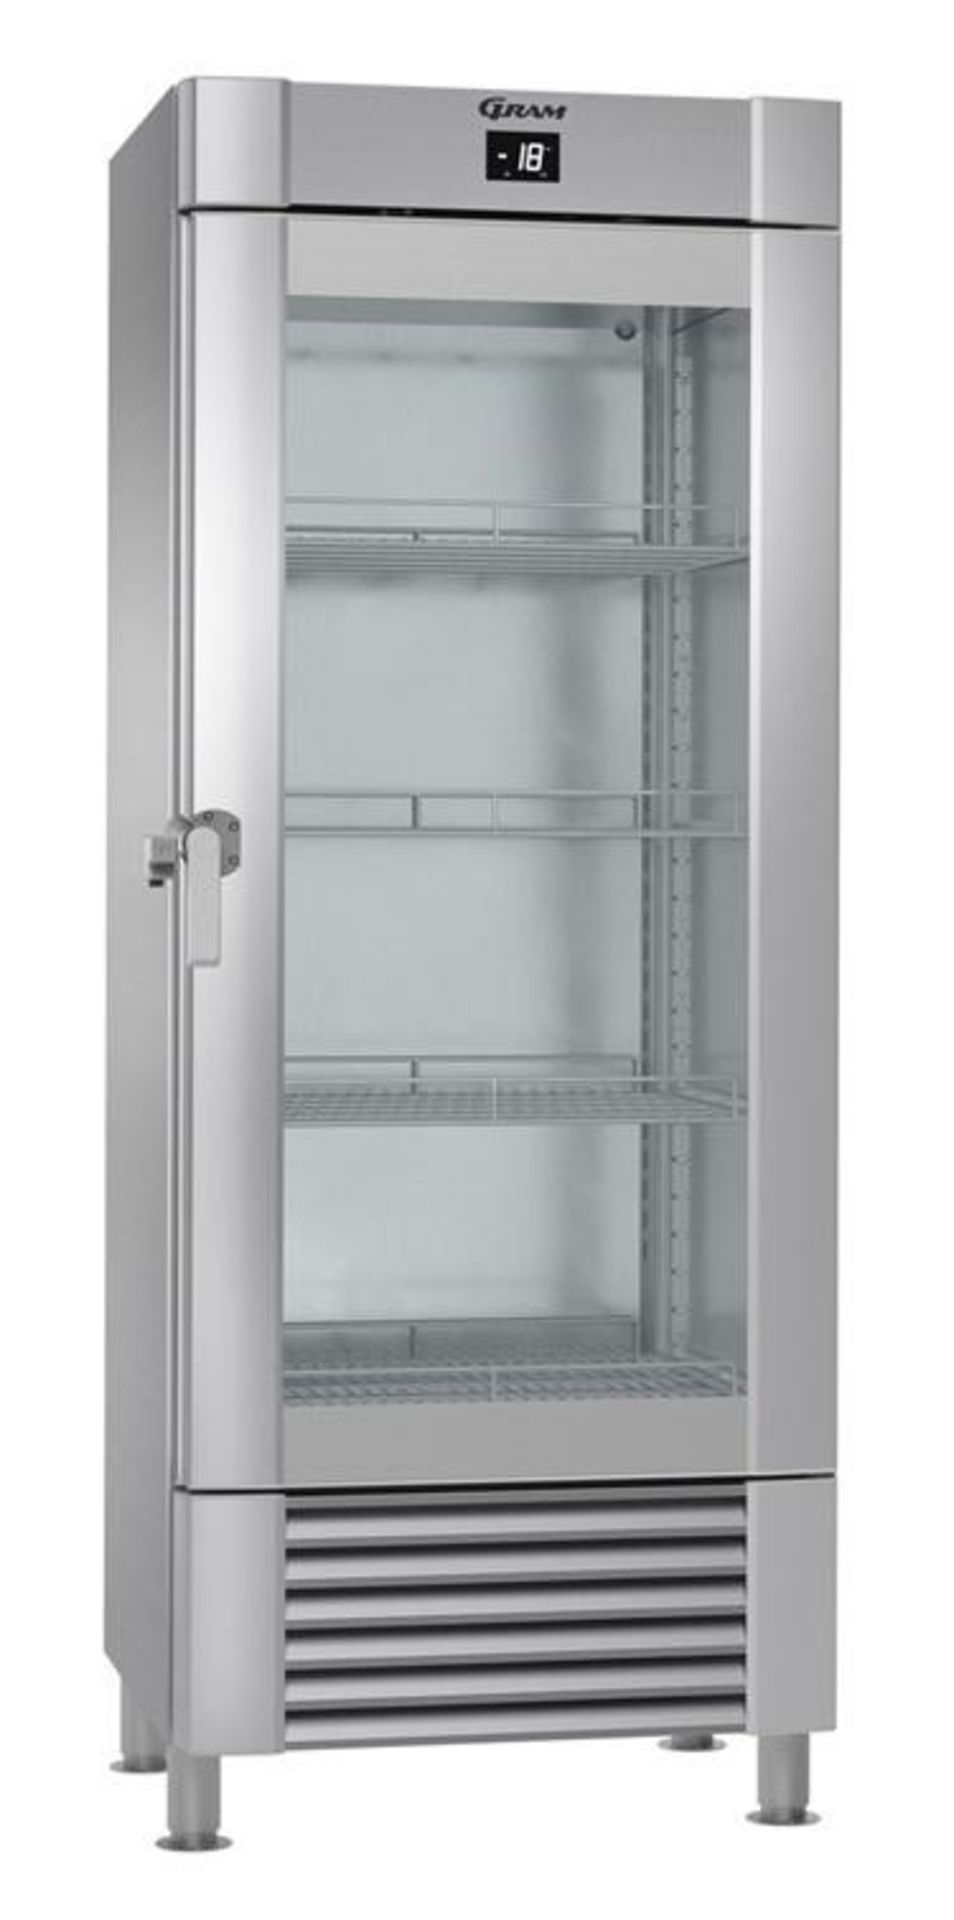 1 x Gram Marine Midi Upright Commercial Freezer With Glass Door - 2/1 GN Wide -  Model FG82CCH4M - C